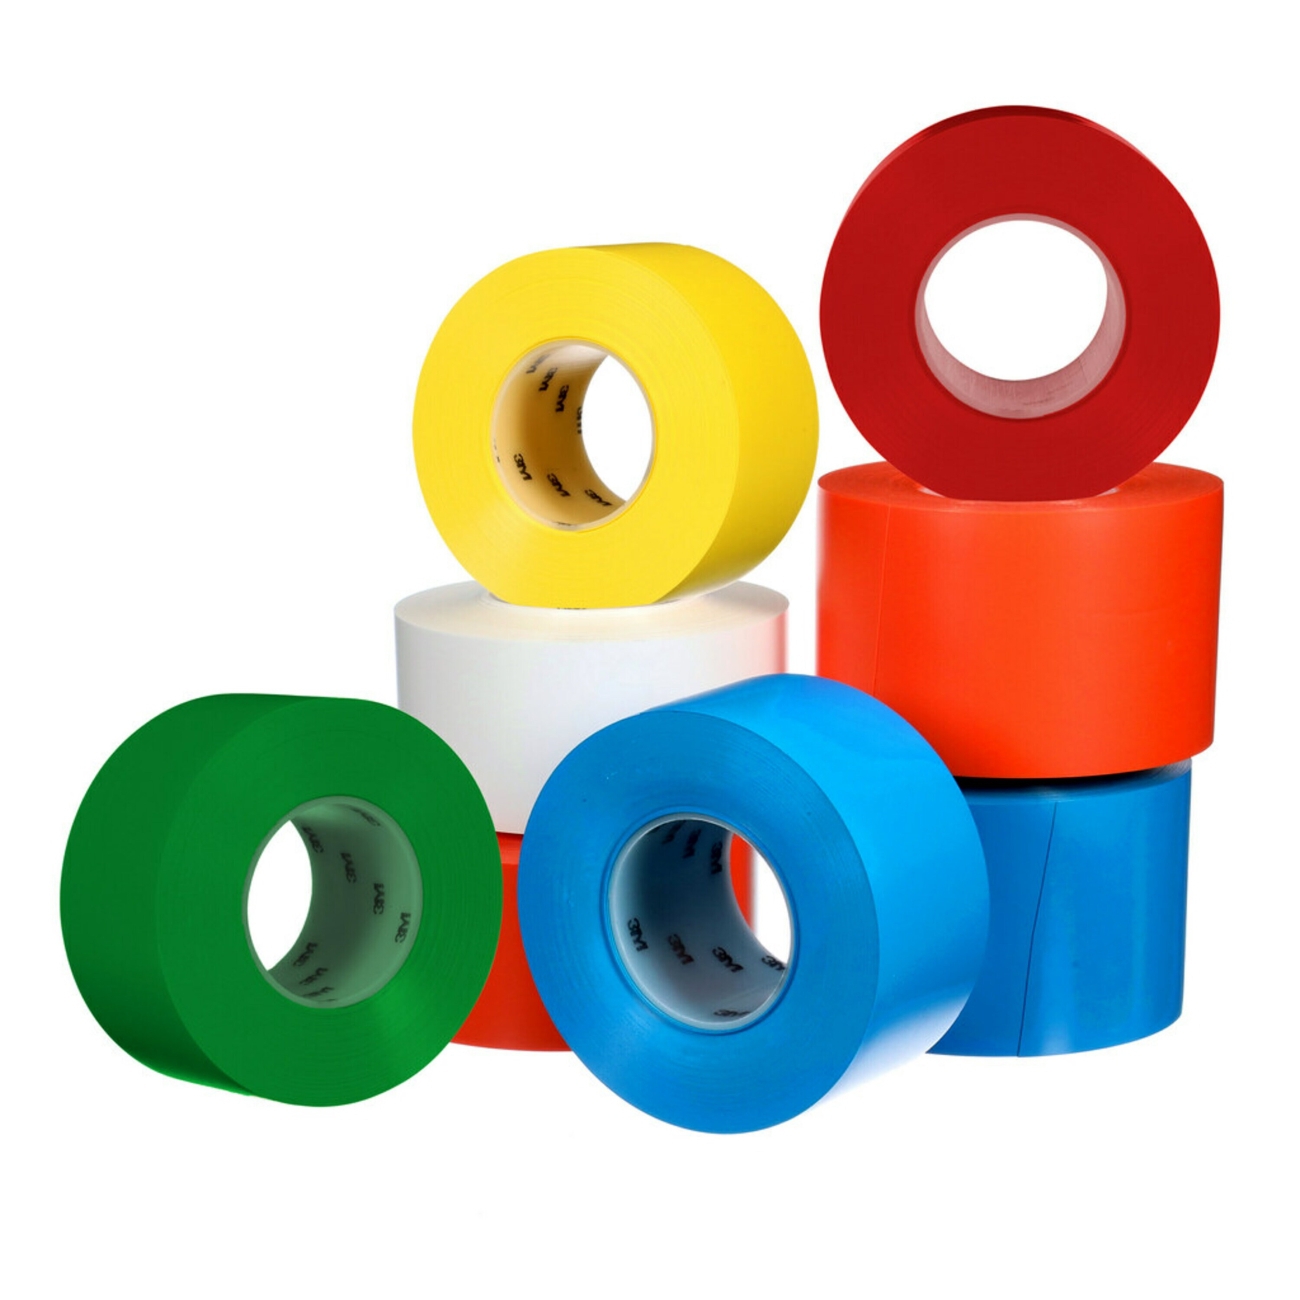 3M extra strong floor marking tape 971, red, 50.8mm x 32.9m, 0.43mm